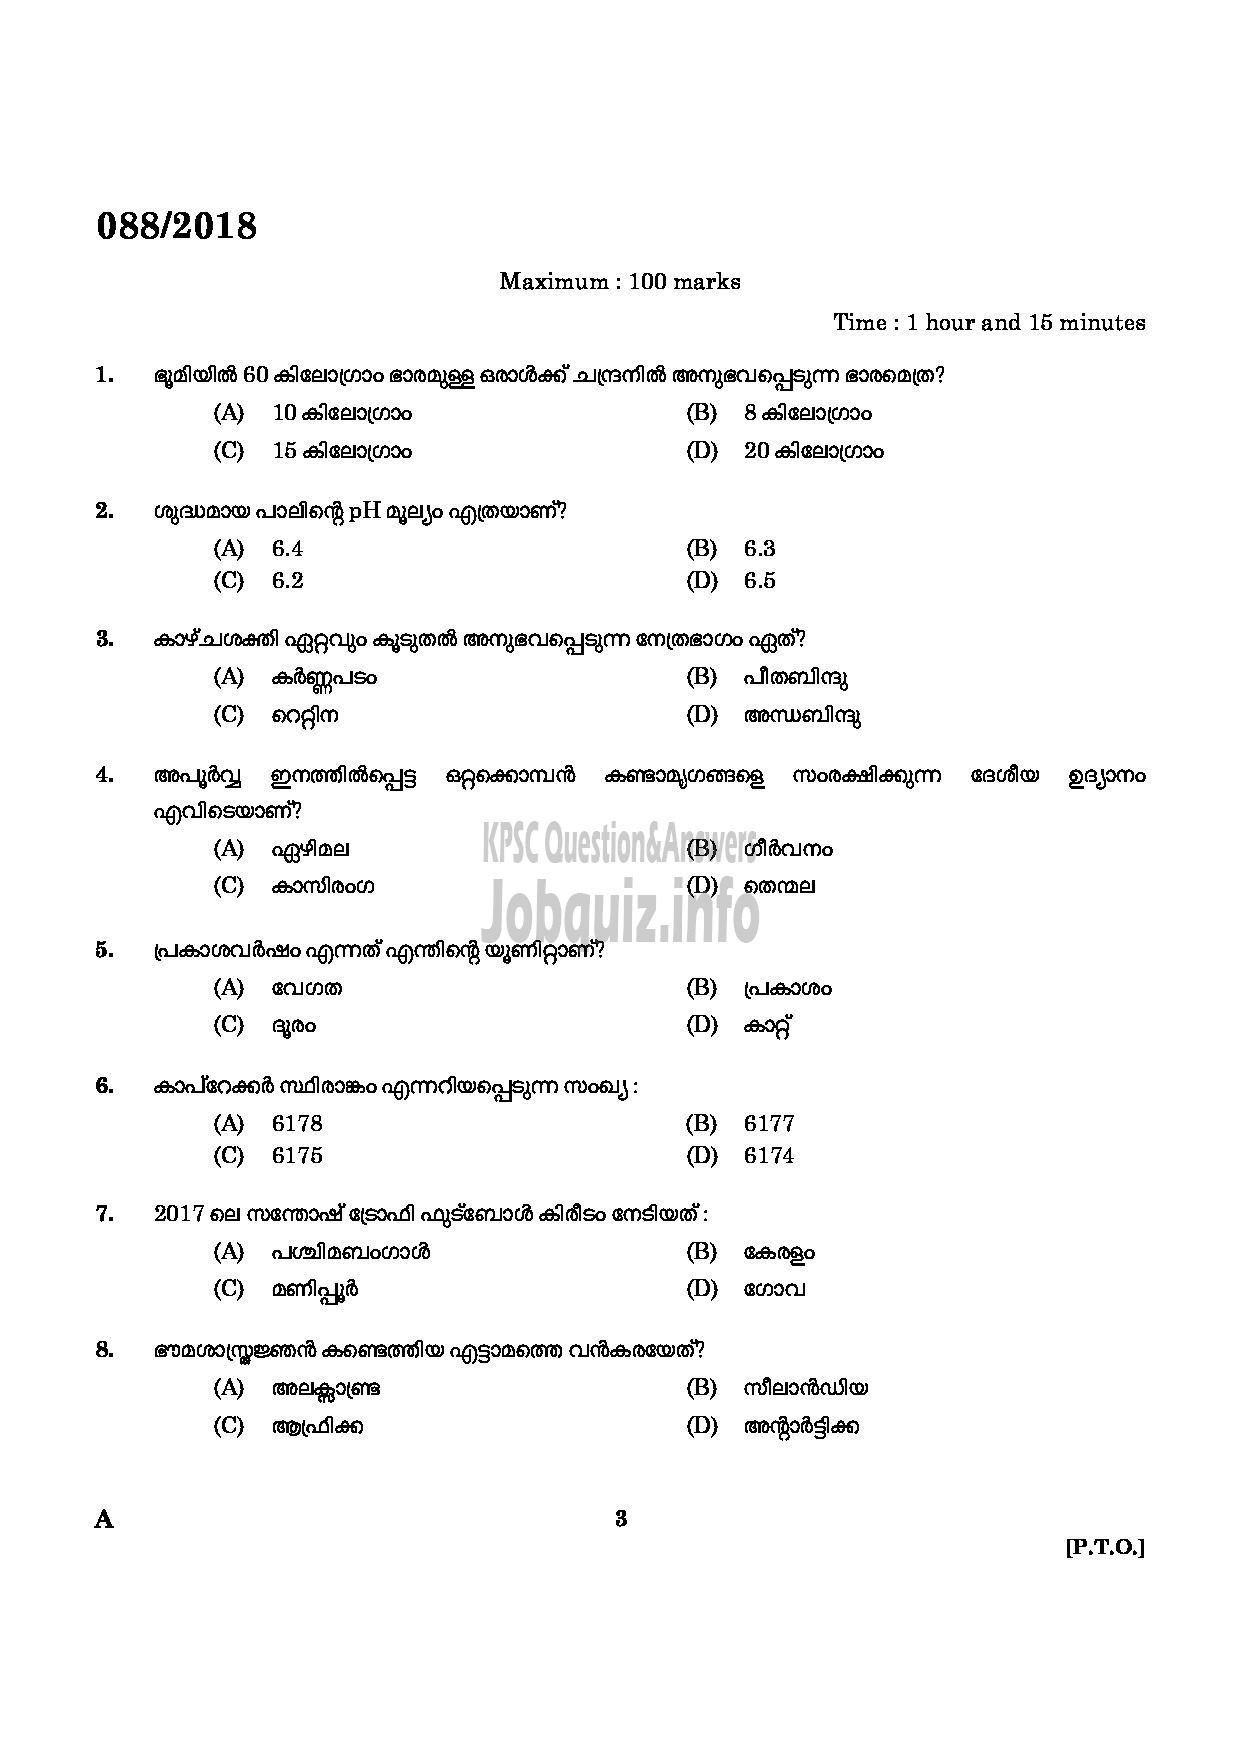 Kerala PSC Question Paper - REPORTER GR II MALAYALAM HEAD CONSTABLE GENERAL EXECUTIVE FORCE POLICE Malayalam-1